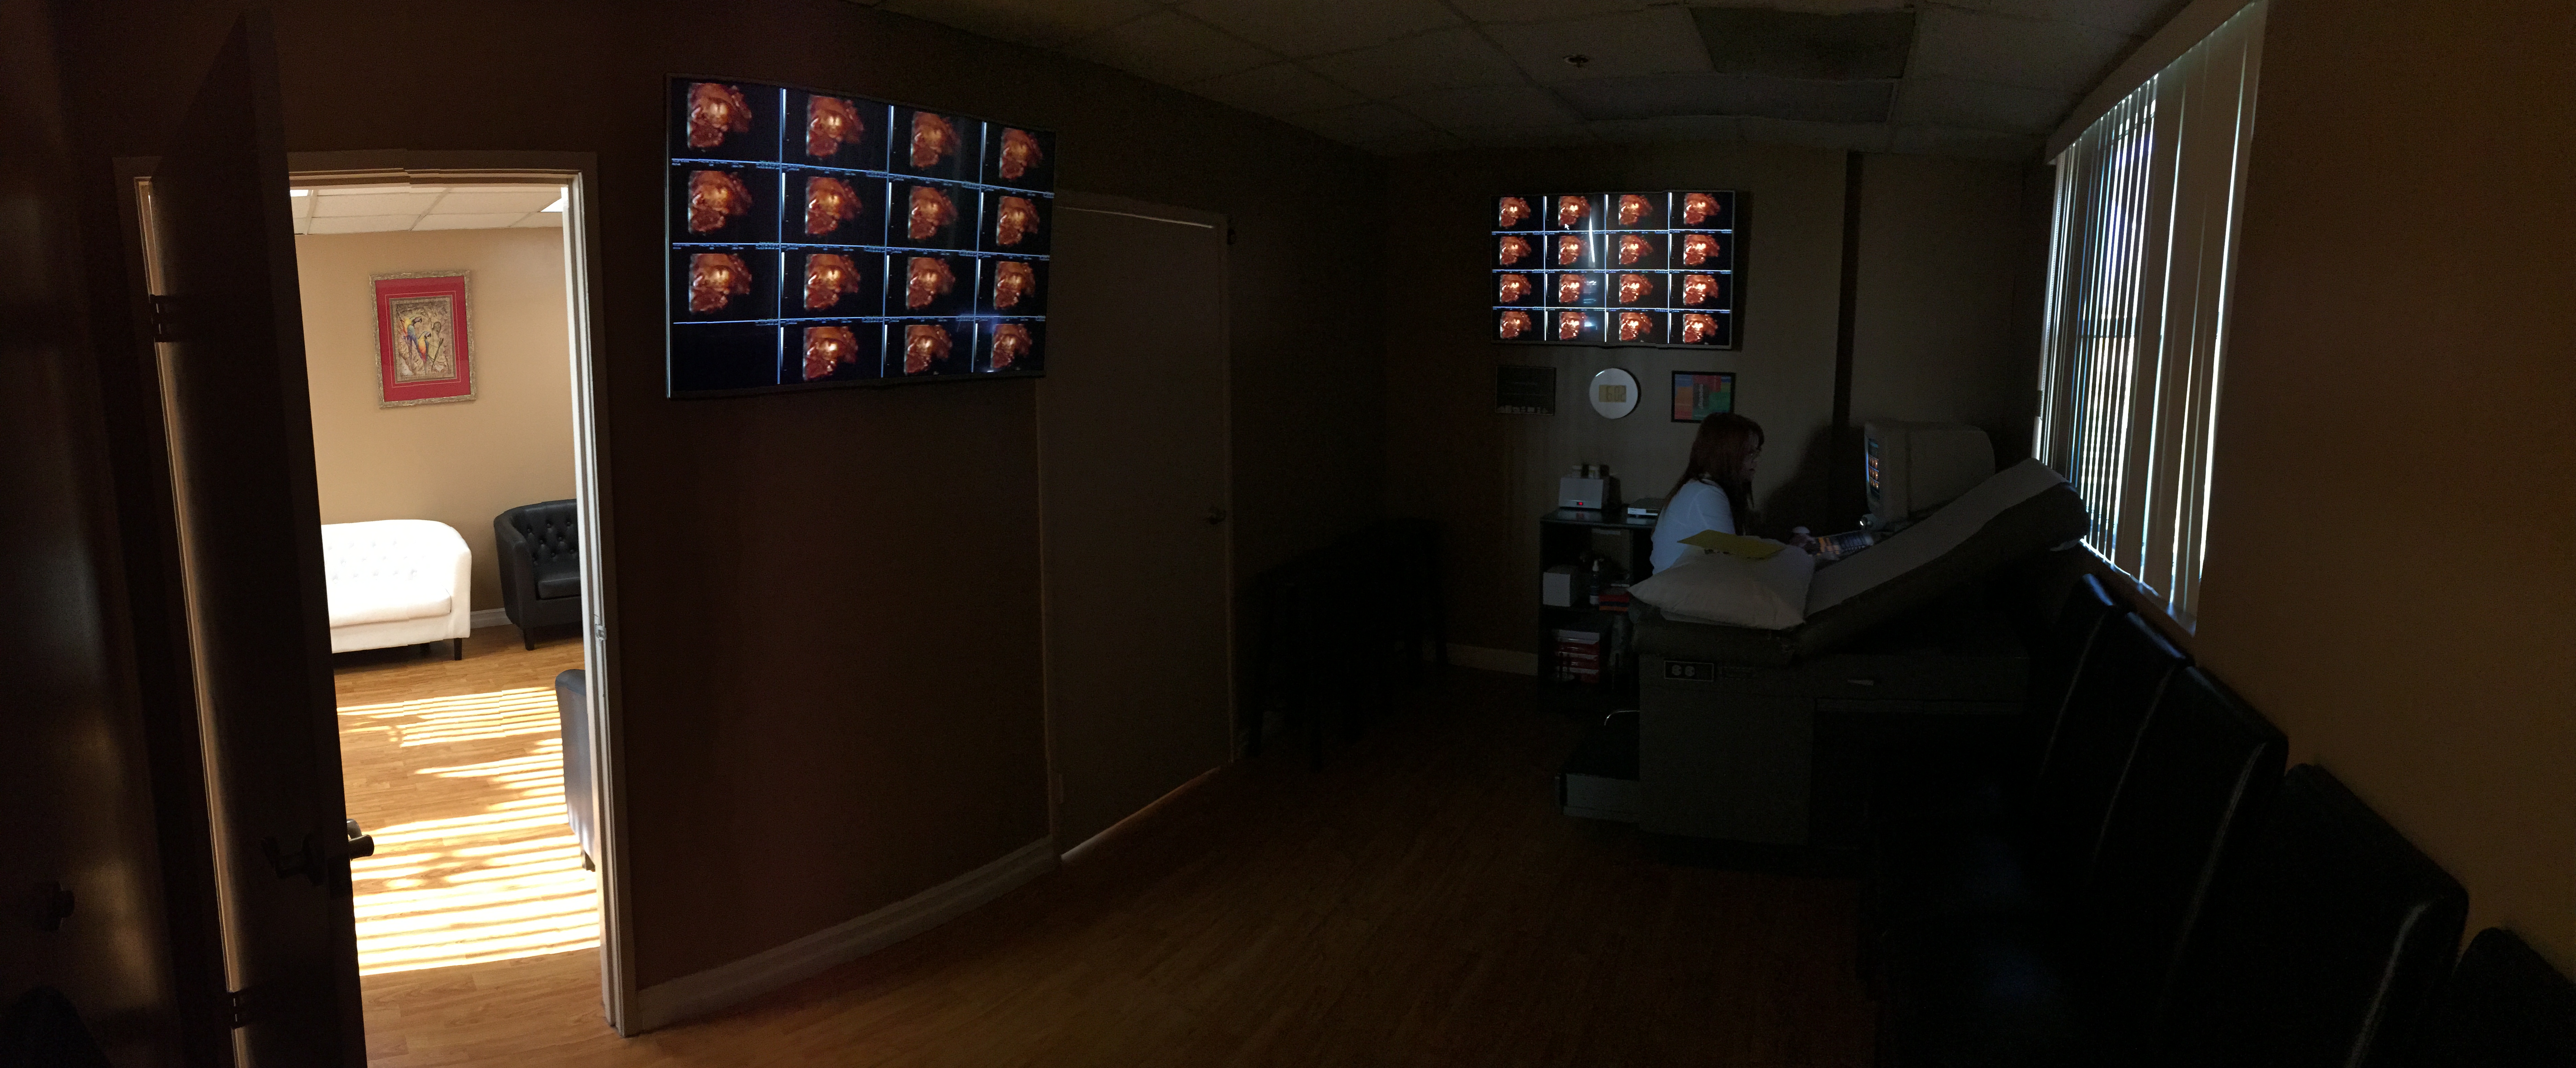 ultrasound viewing room